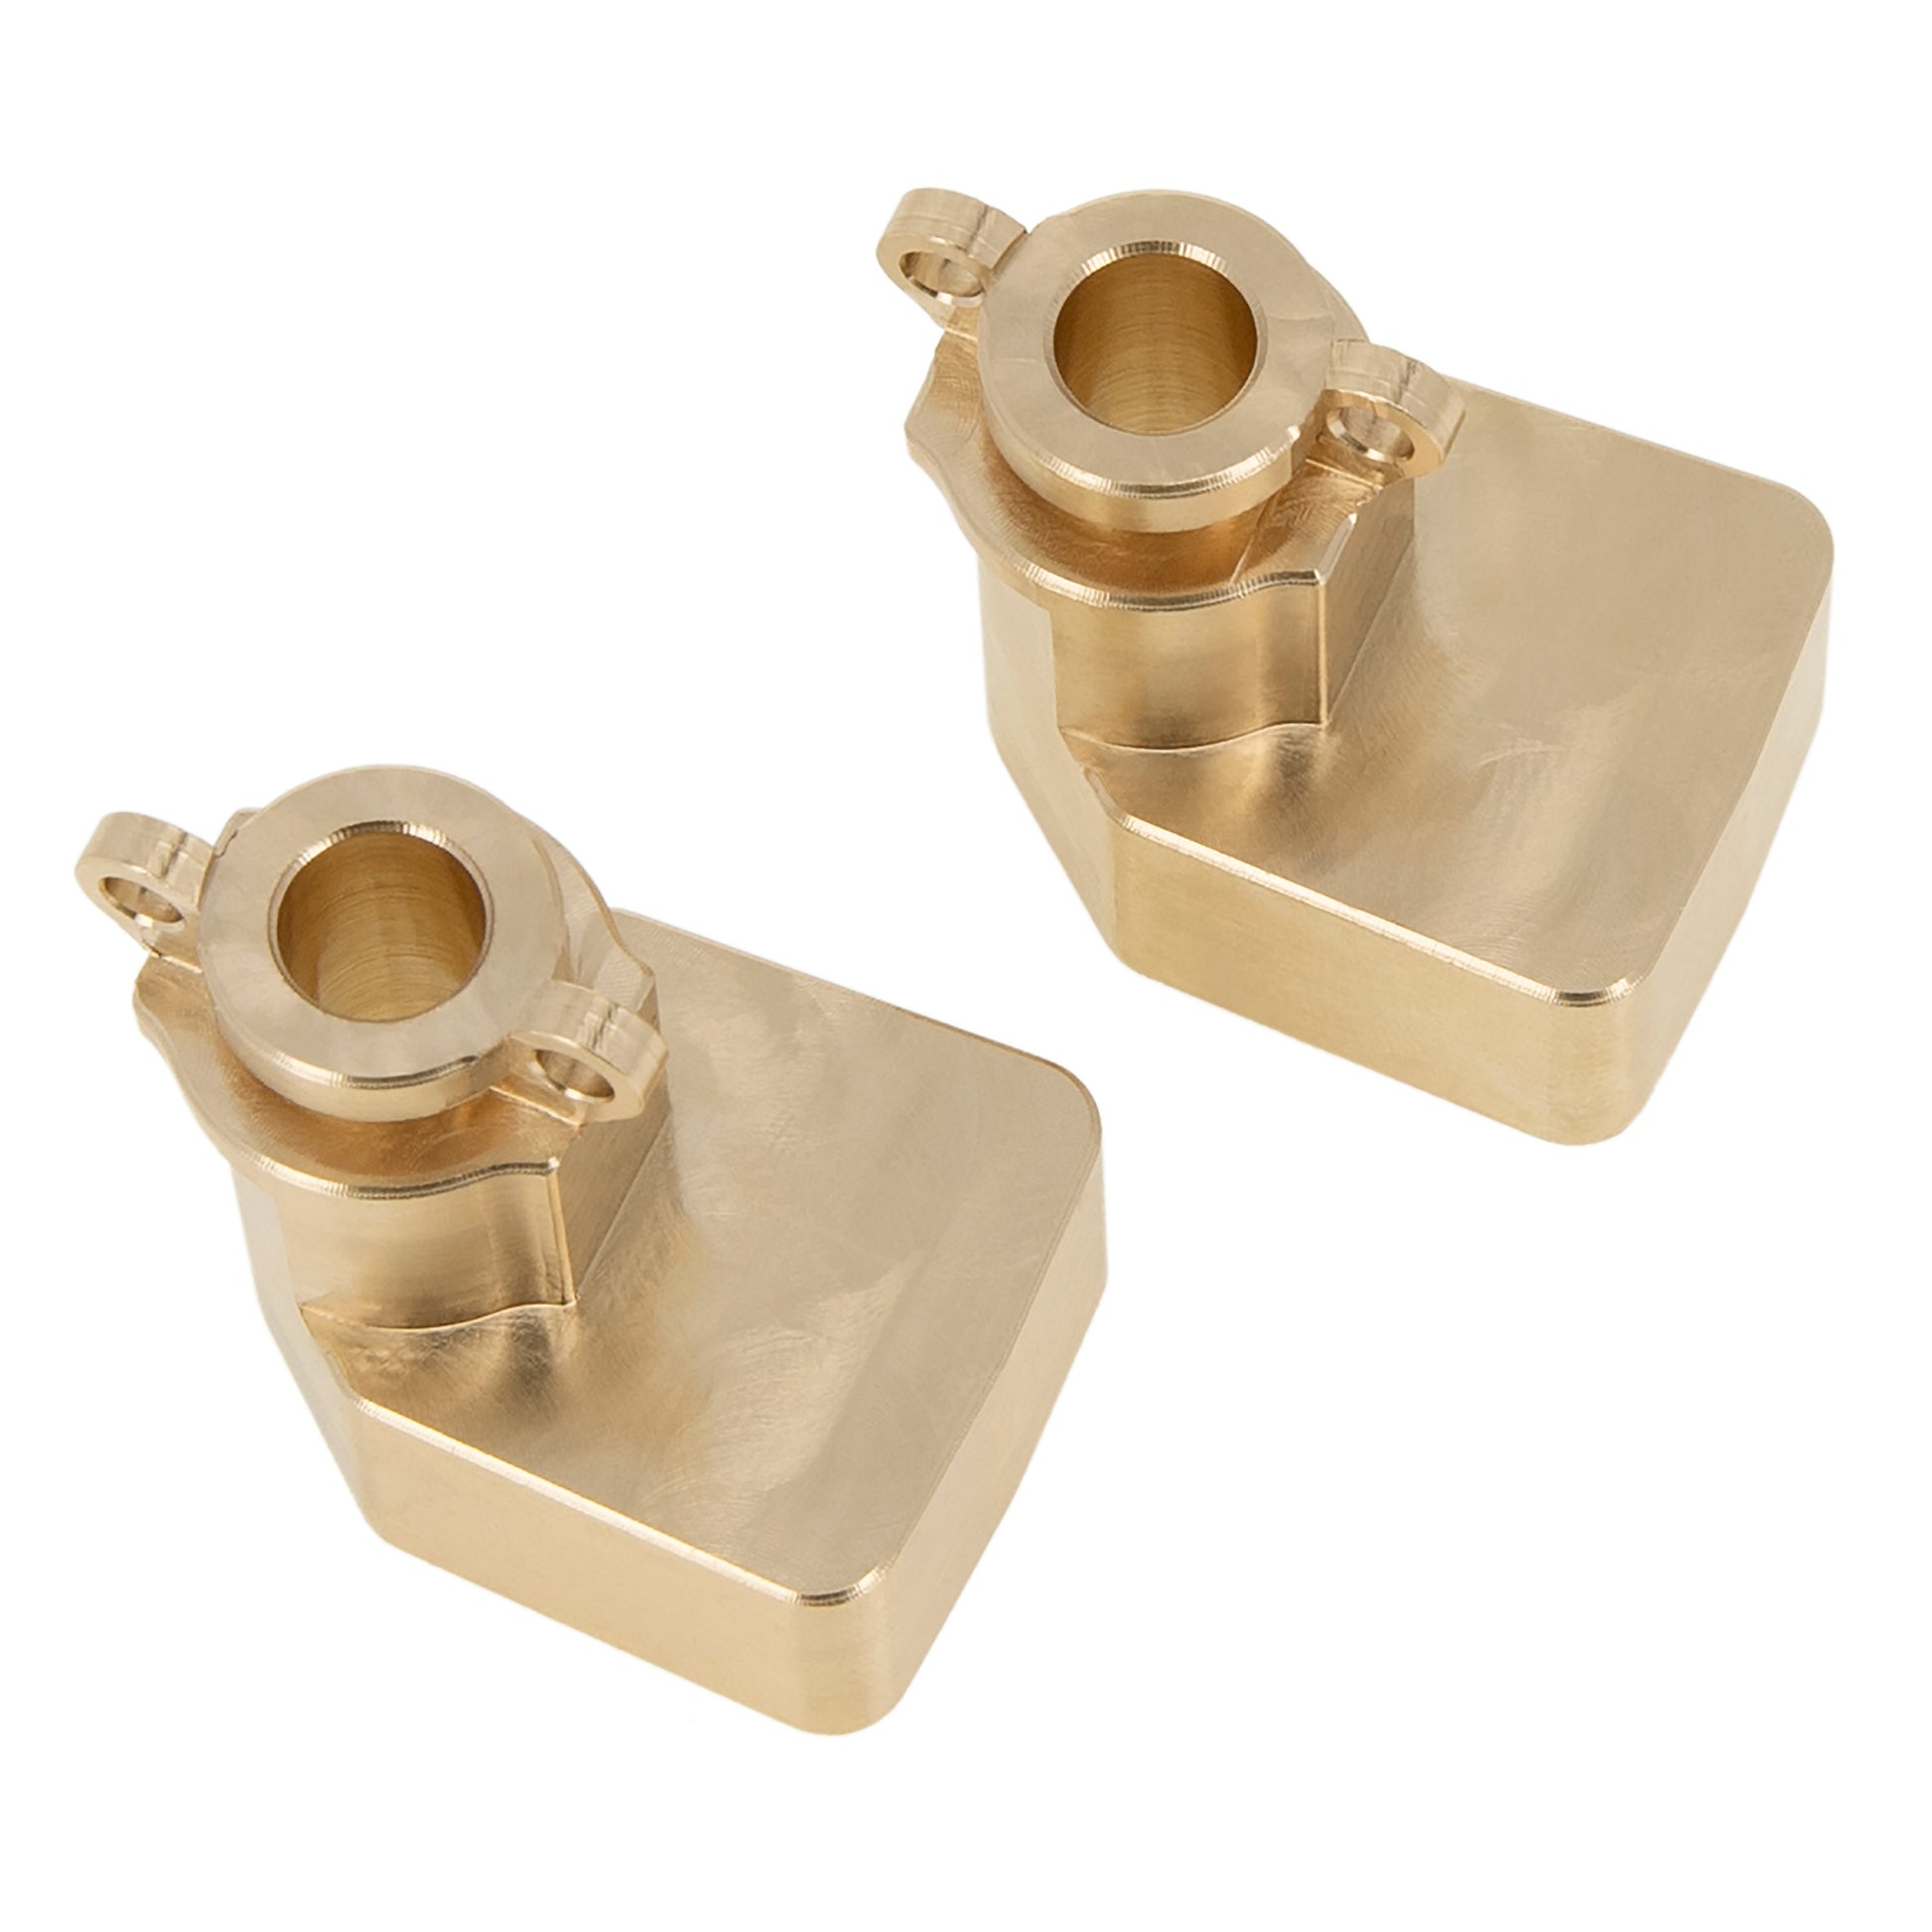  Gold Brass Rear Axle Carriers for UTB18